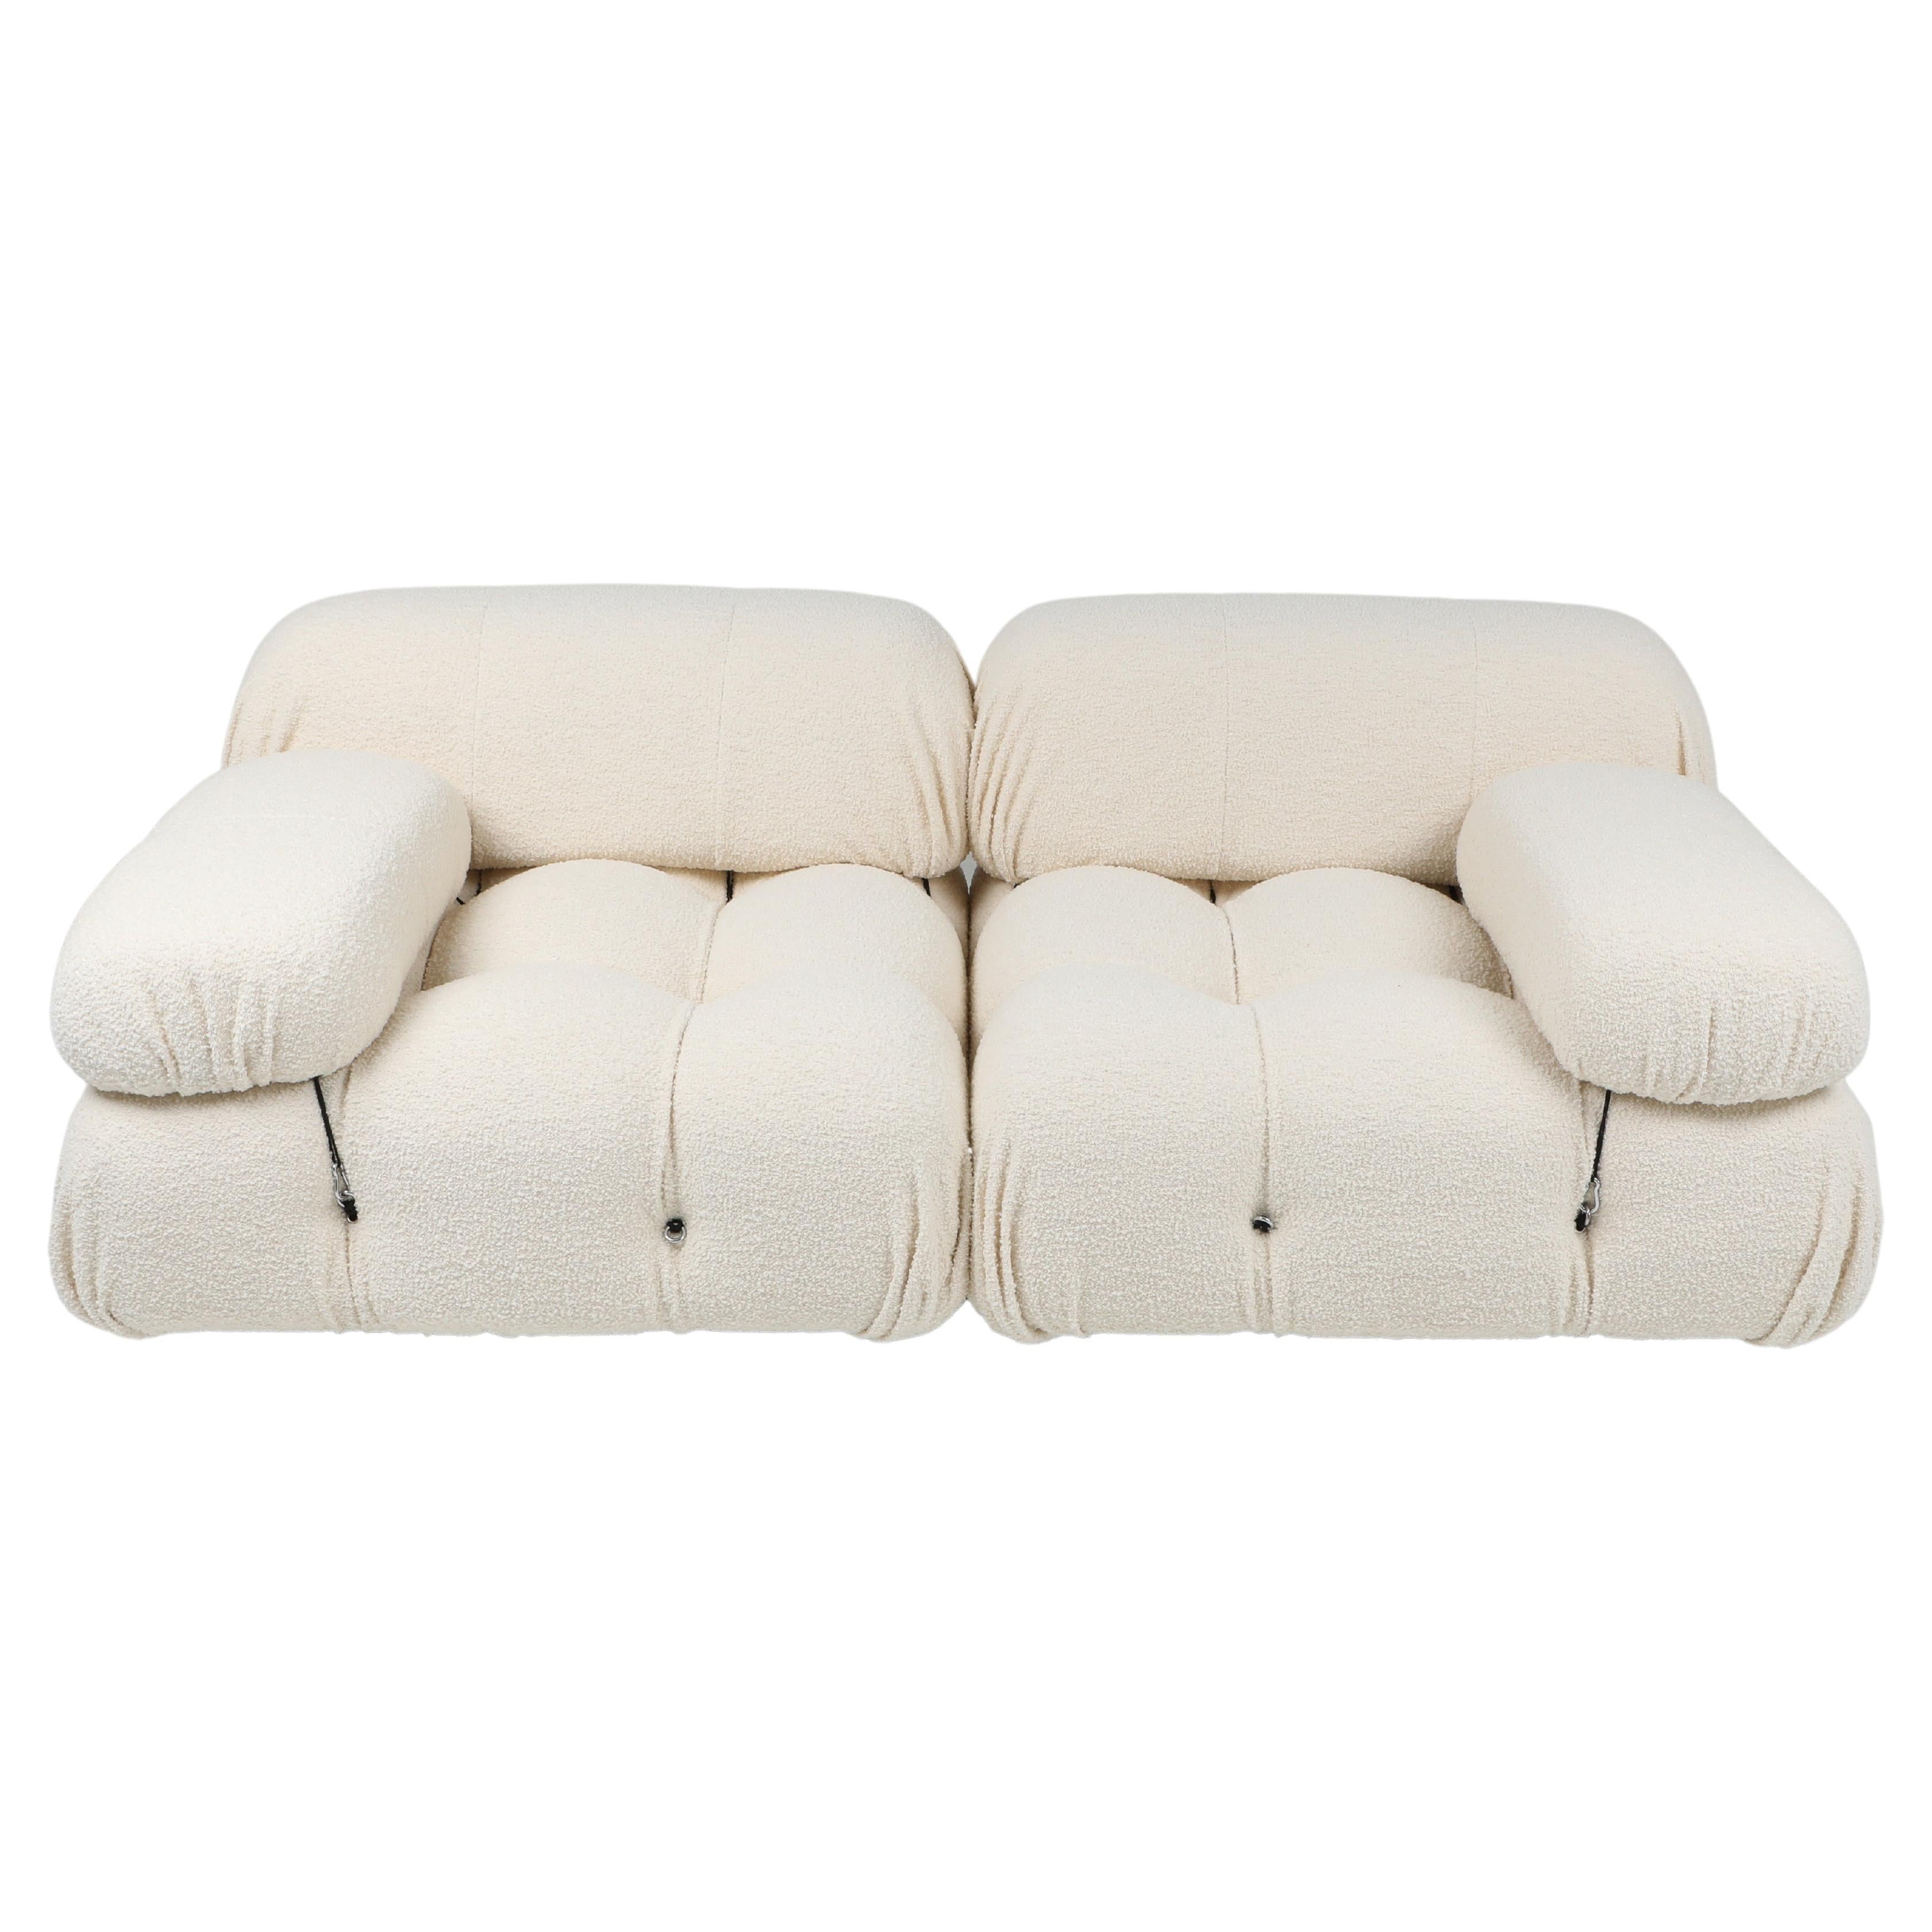 Camaleonda Sofa Set in Boucle Wool with Armrests by Mario Bellini, 1970's